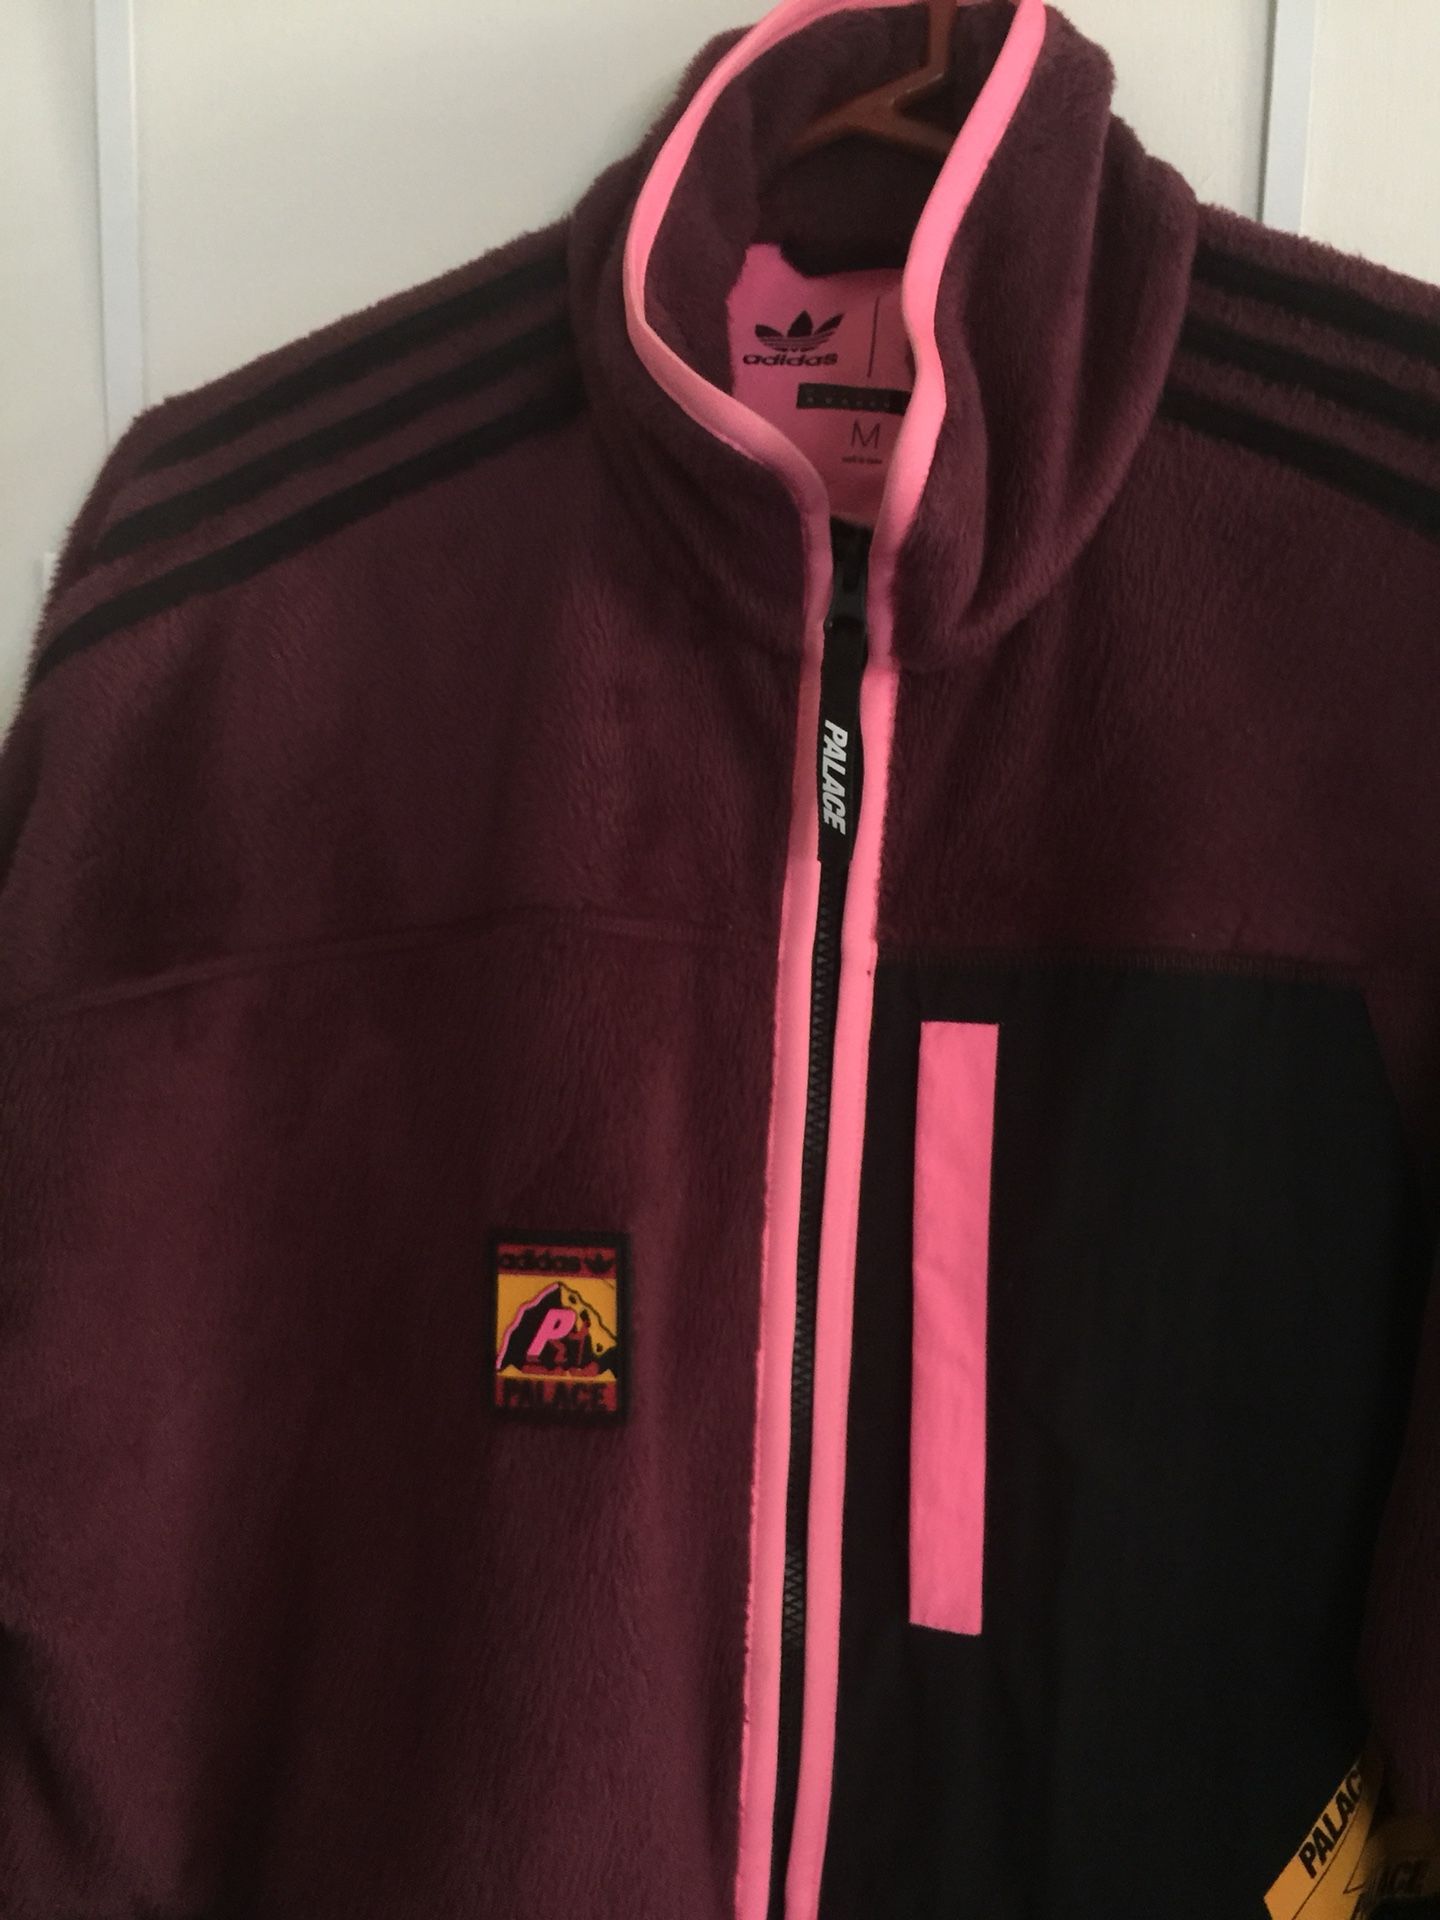 X Adidas Polar Track Top for Sale in Beavercreek, OH - OfferUp